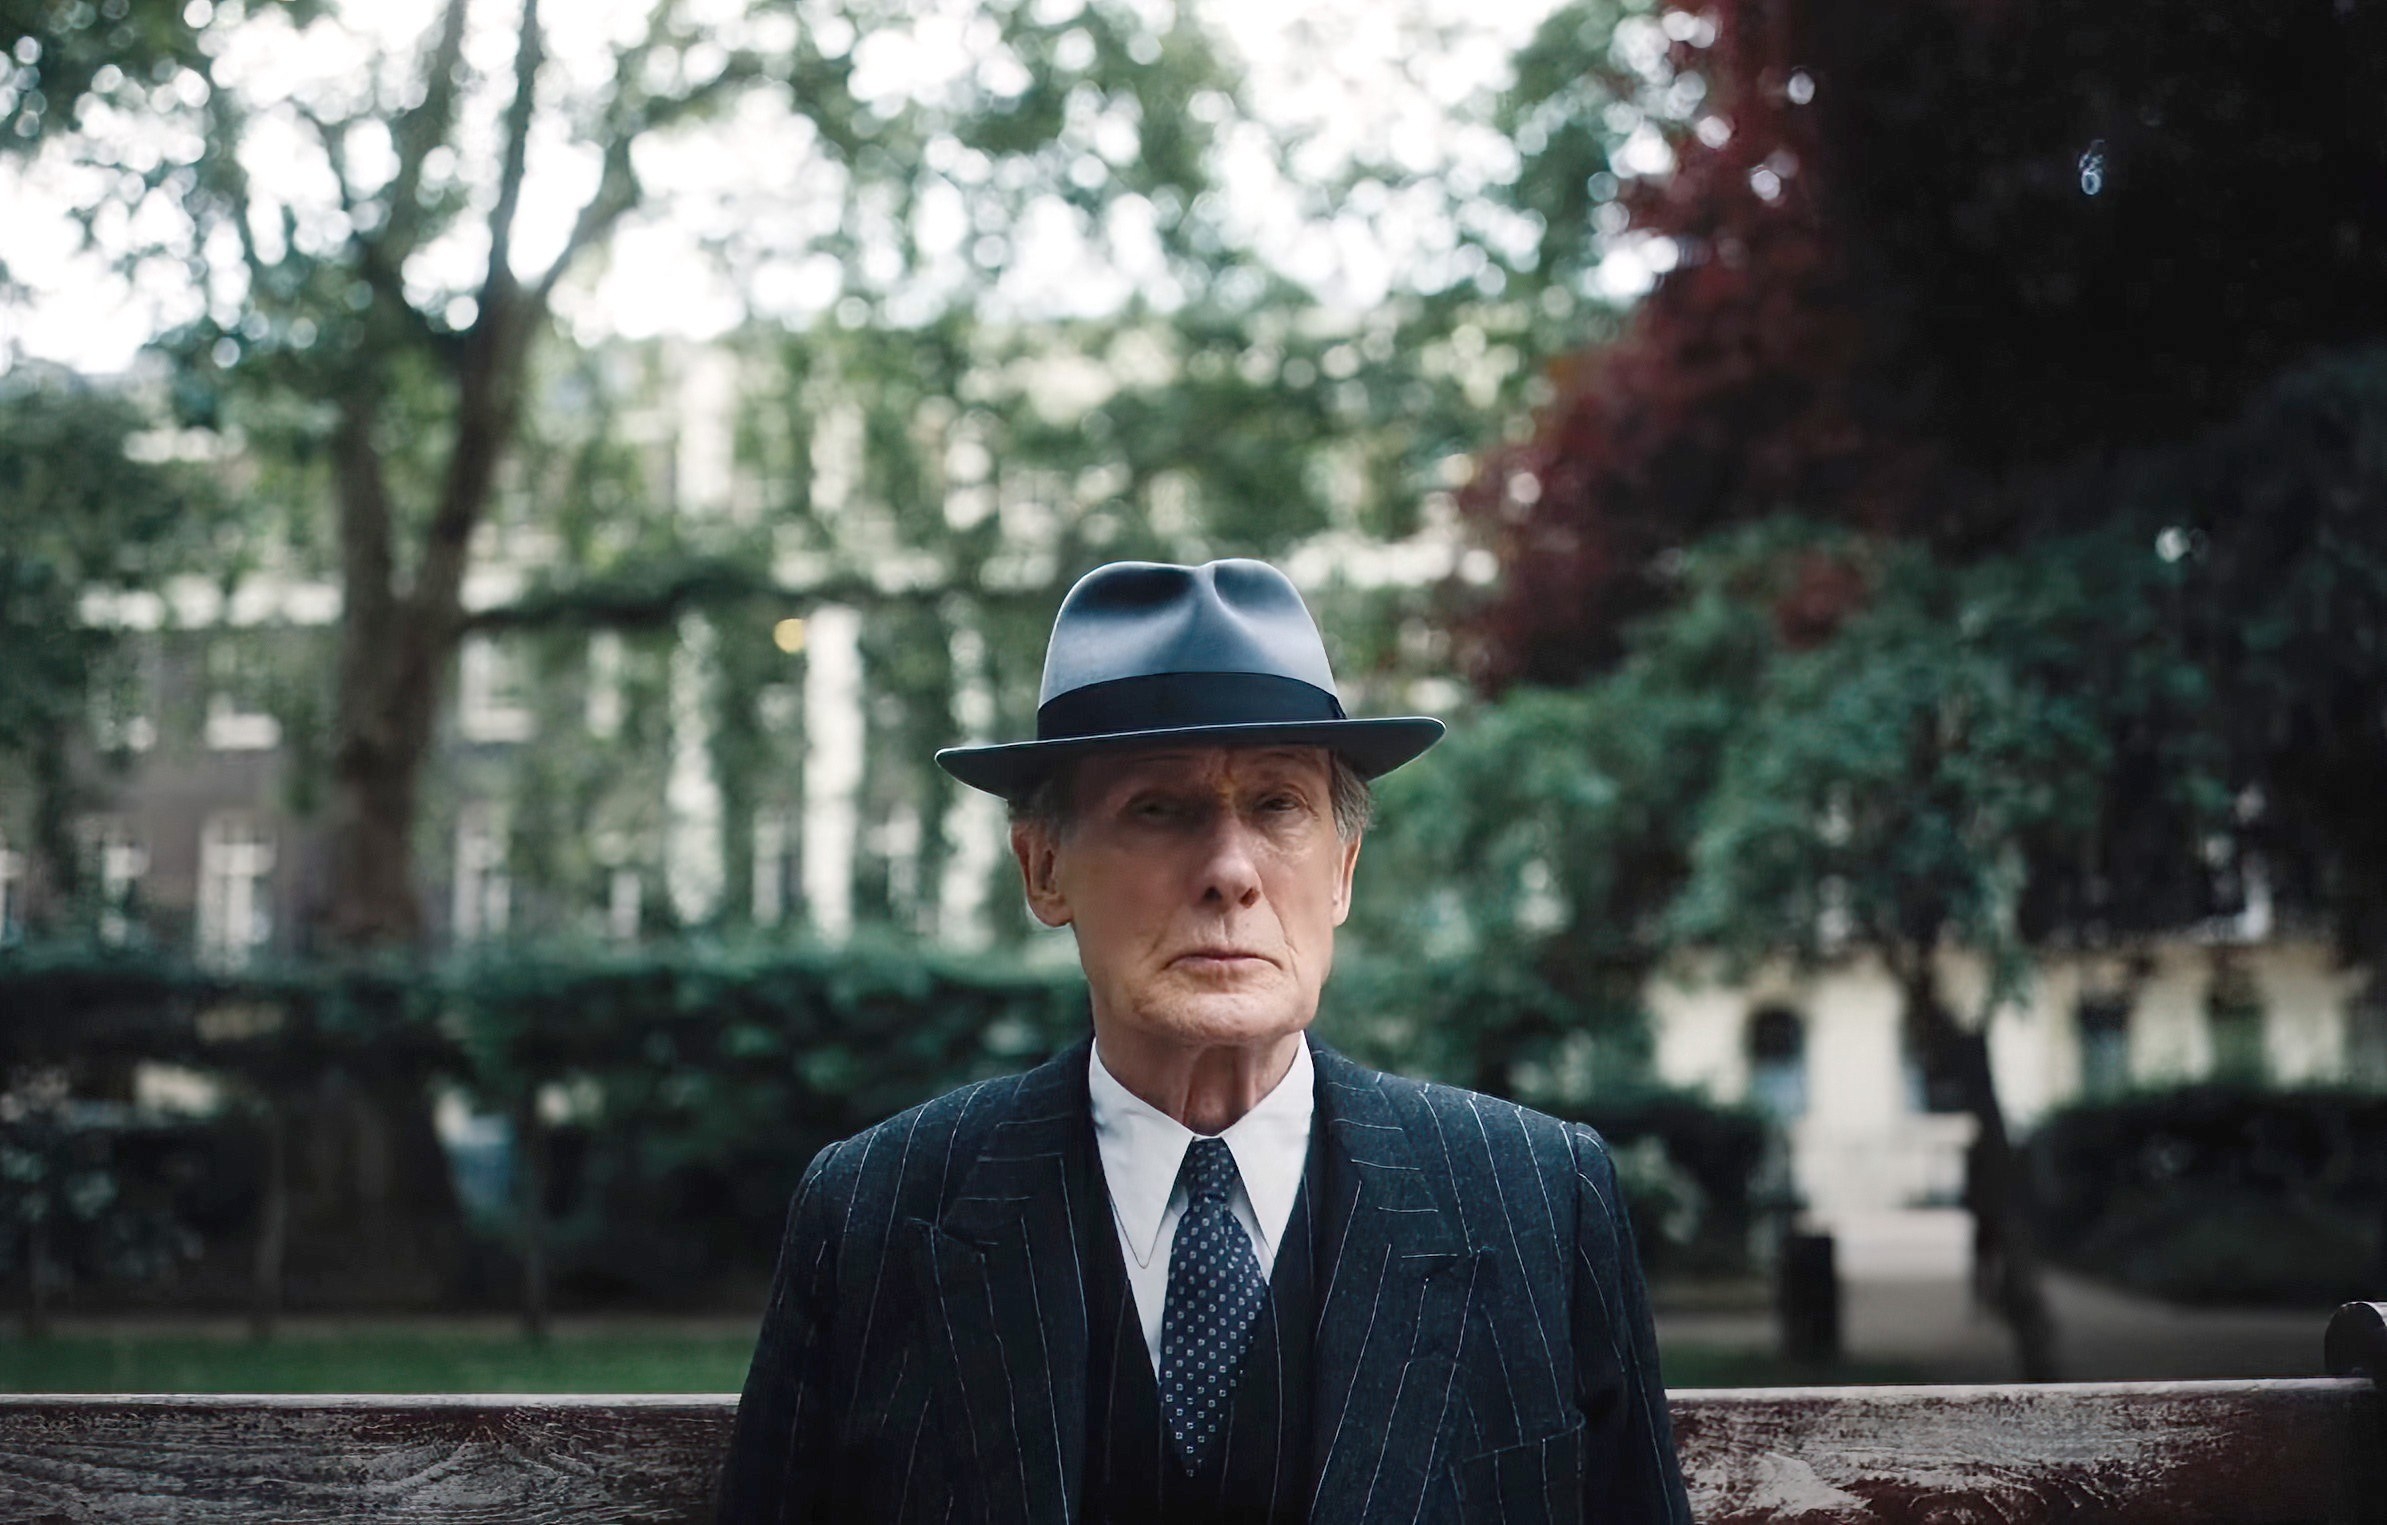 Bill Nighy stands in the street with a hat on